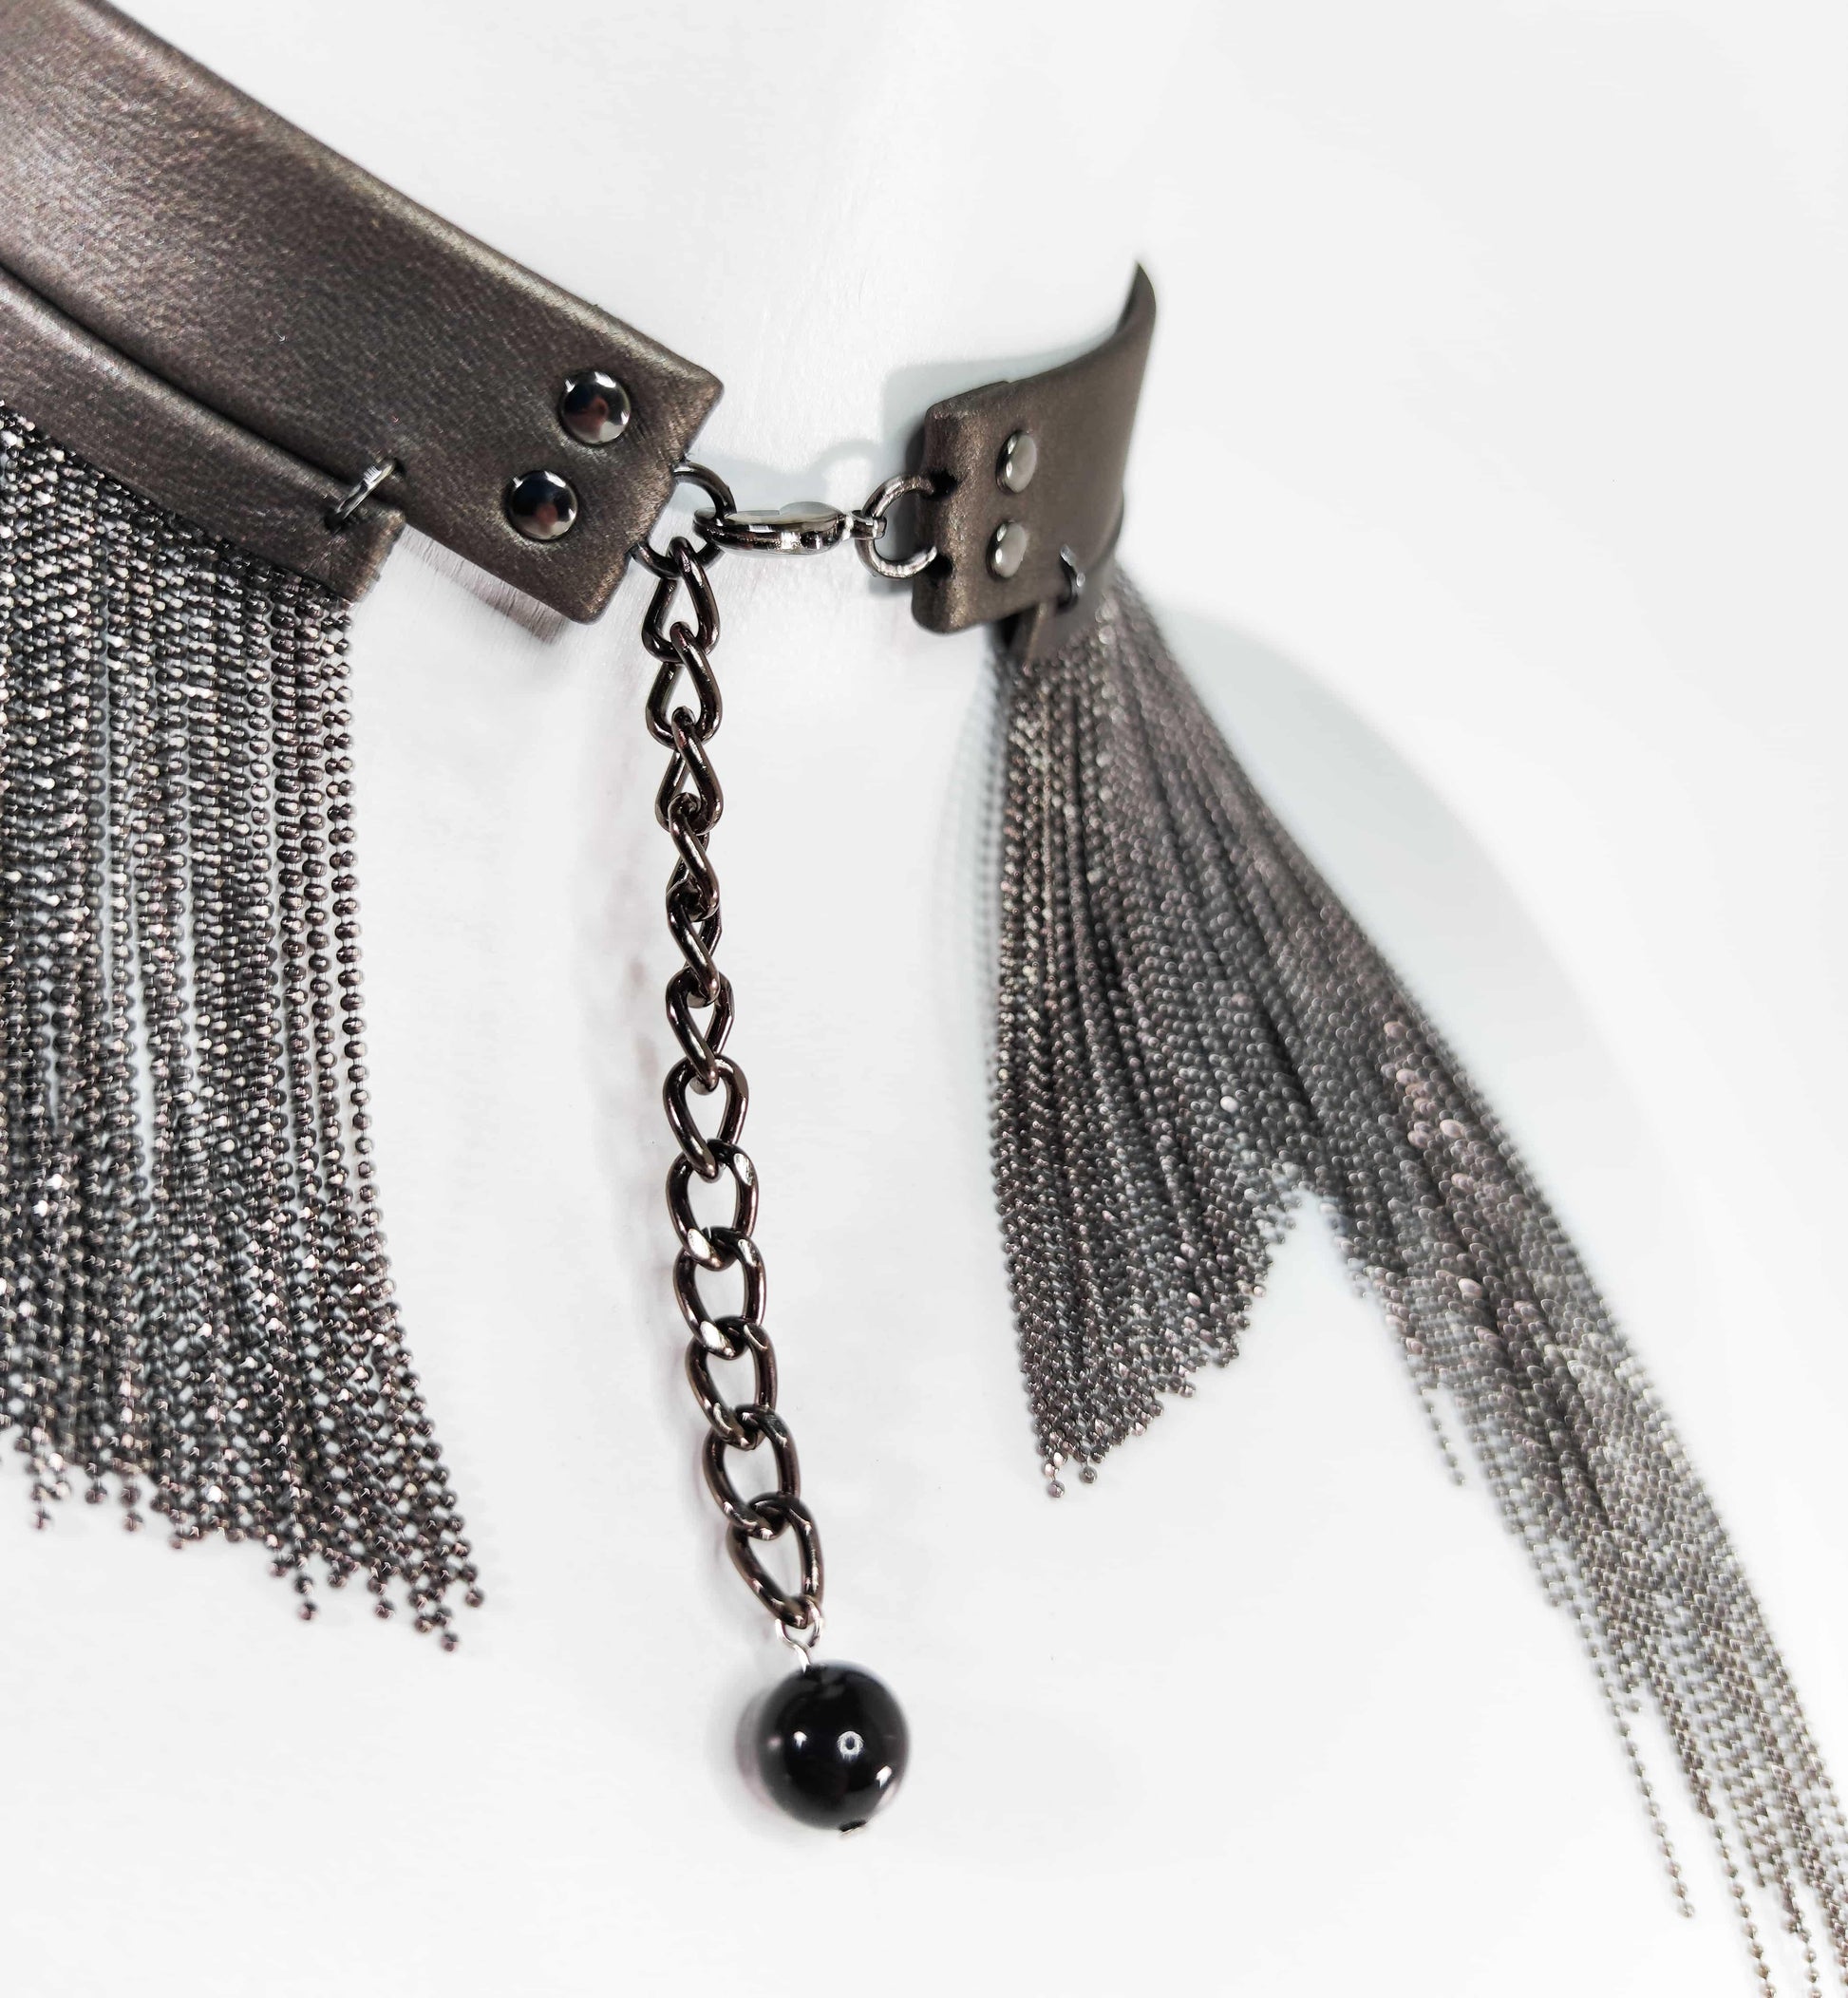 Exquisite detail of Long Leather Chocker with Chains showcasing the fine craftsmanship and elegant design characteristic of Axinia Collection 's luxury collection.